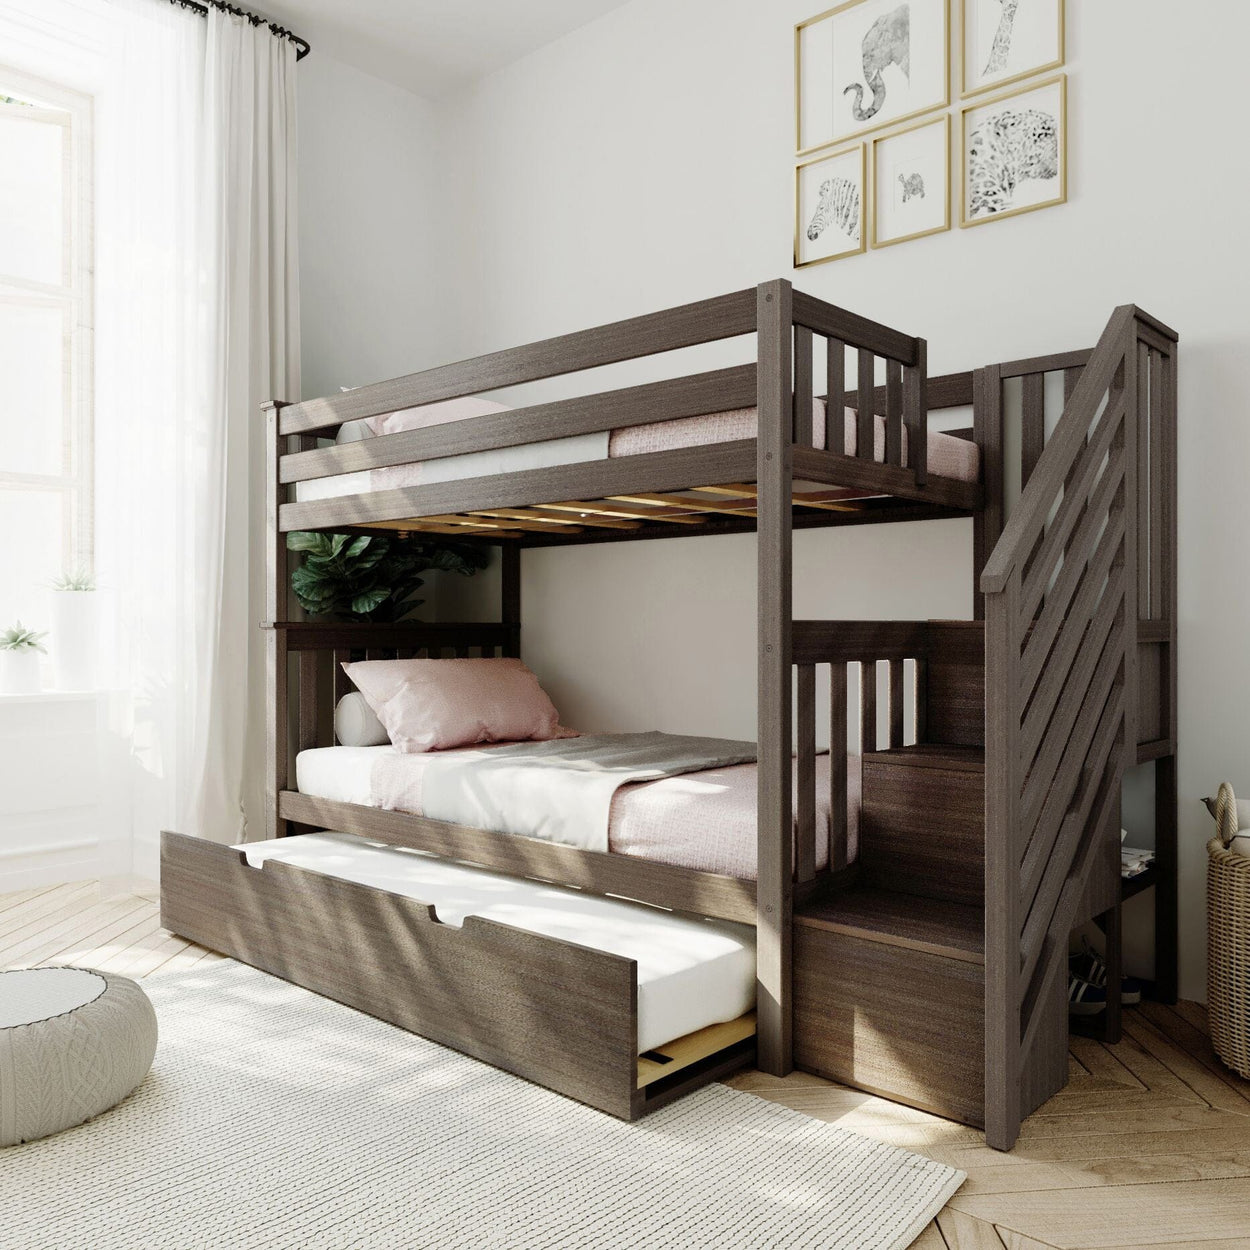 186205-151 : Bunk Beds Twin over Twin Staircase Bunk with Trundle, Clay